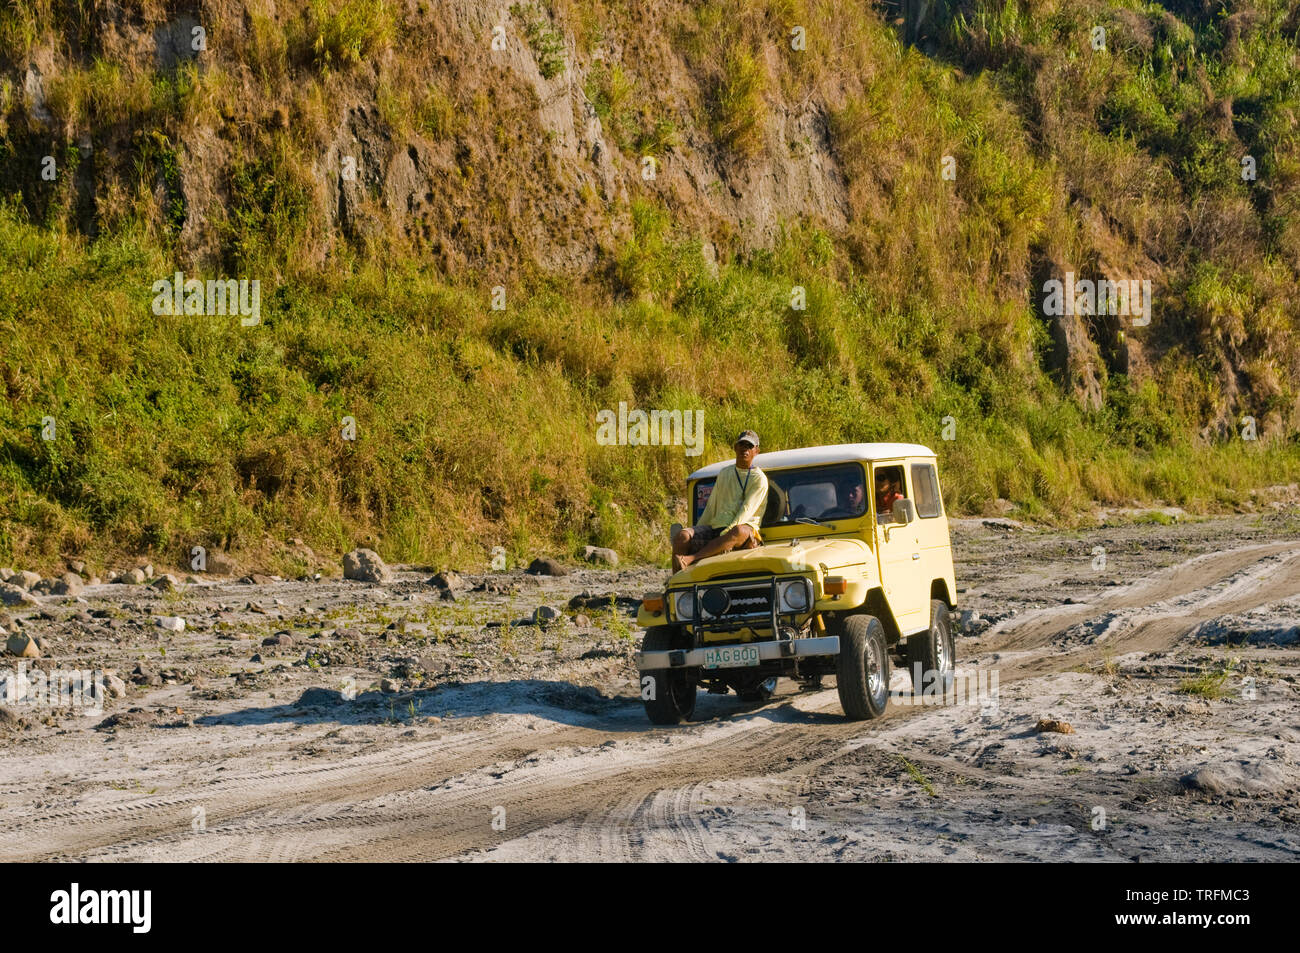 Going to up to Lake Pinatubo  requires a long trek through rough terrains. 4 wheels all-terrain vehicles can shorten the walk with a rough ride. Stock Photo